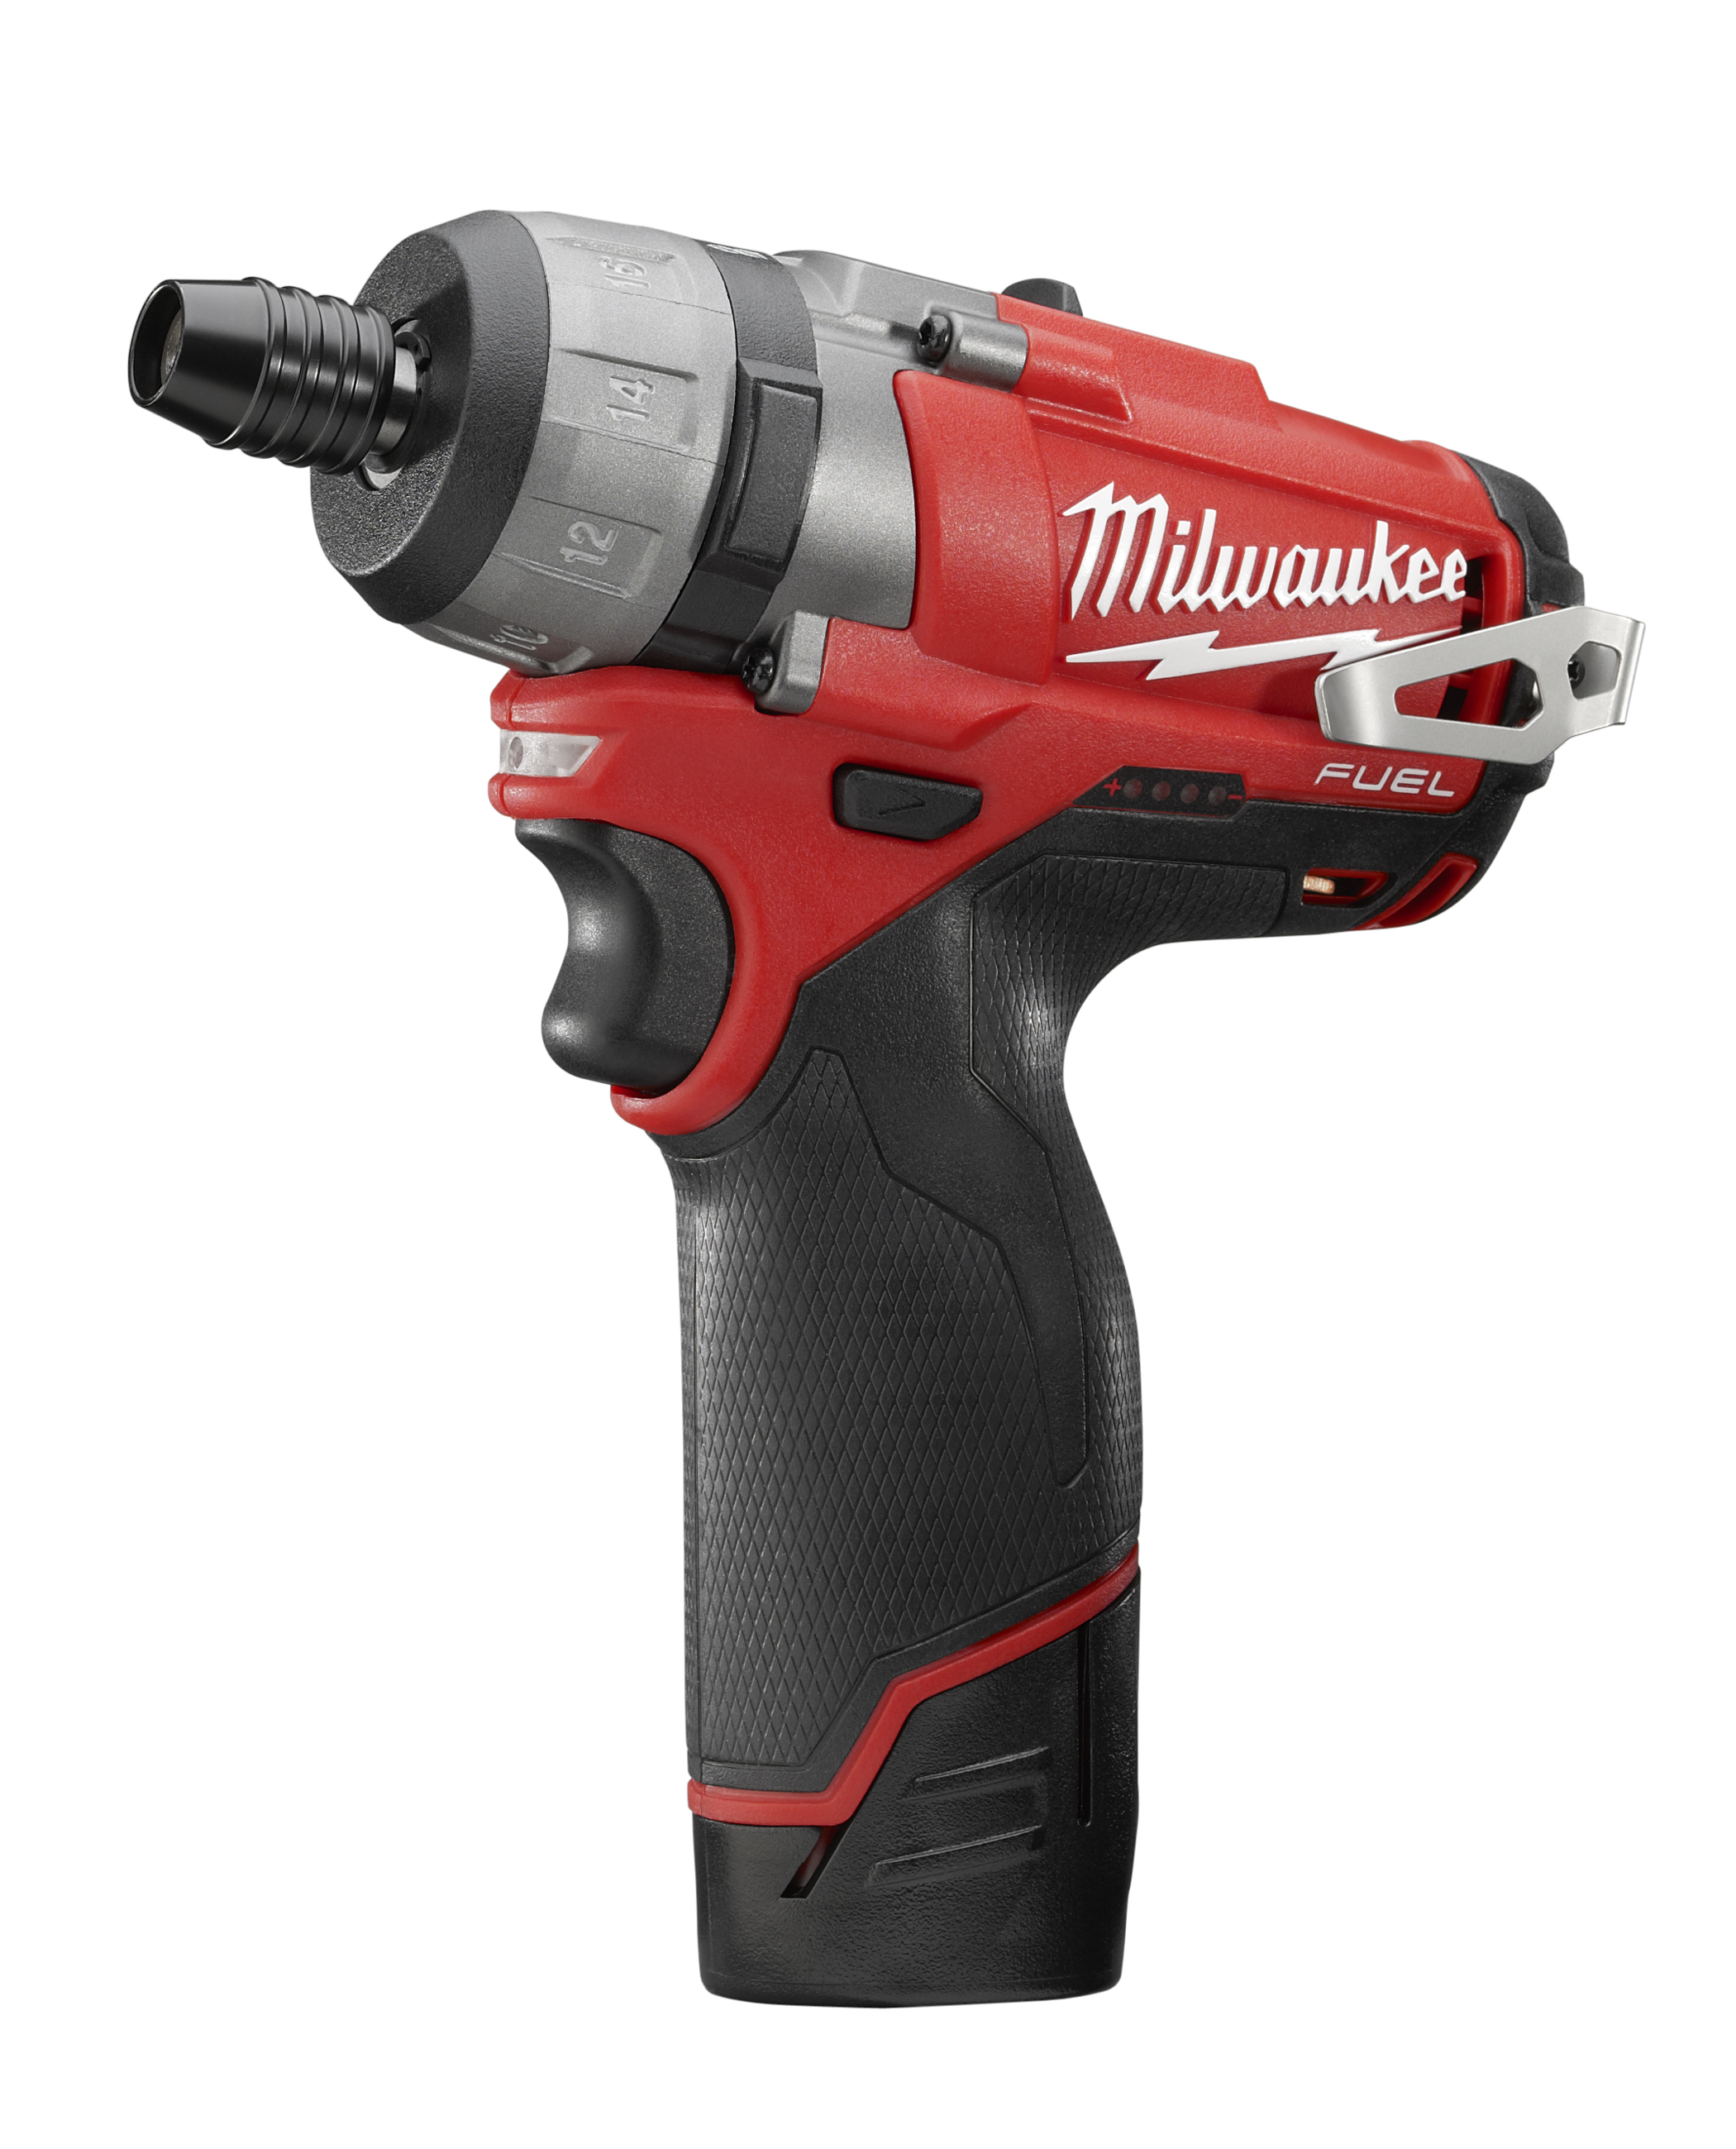 M12 FUEL 12 Volt Lithium-Ion Brushless Cordless 2 Seed Screwdriver Kit